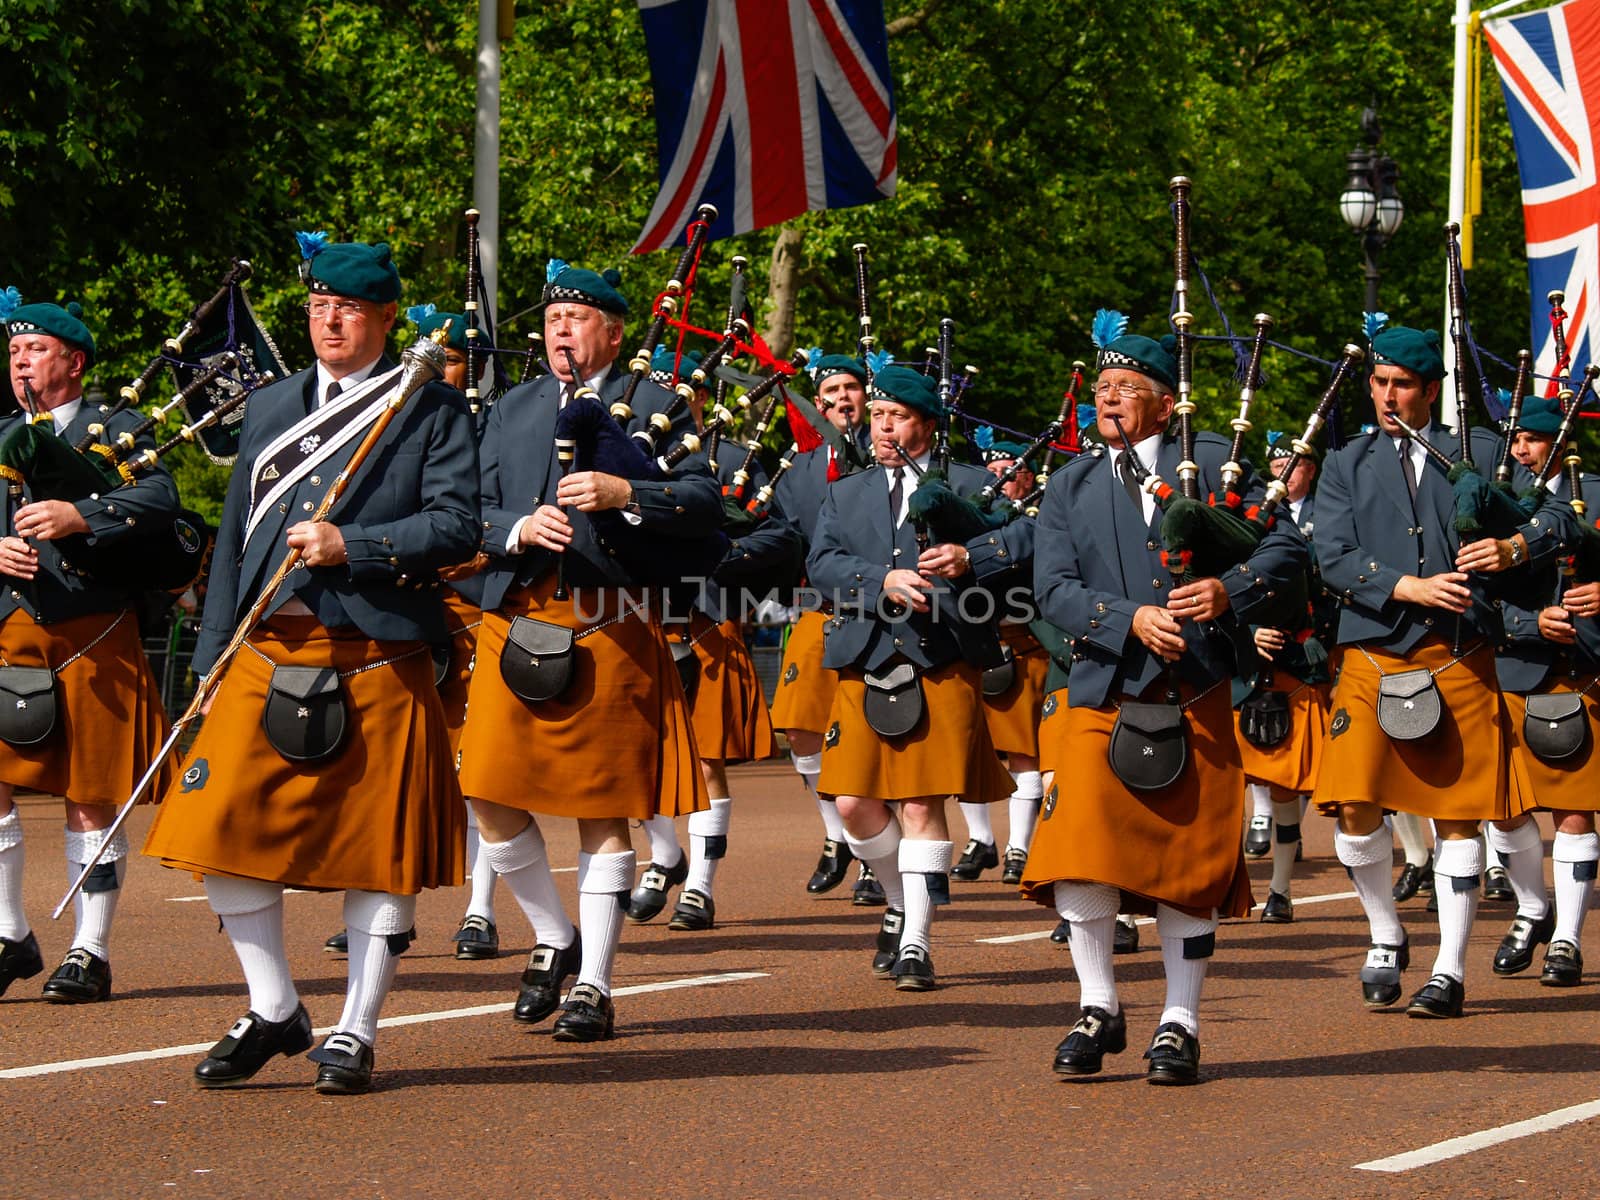 Bagpipe band in London. by brians101